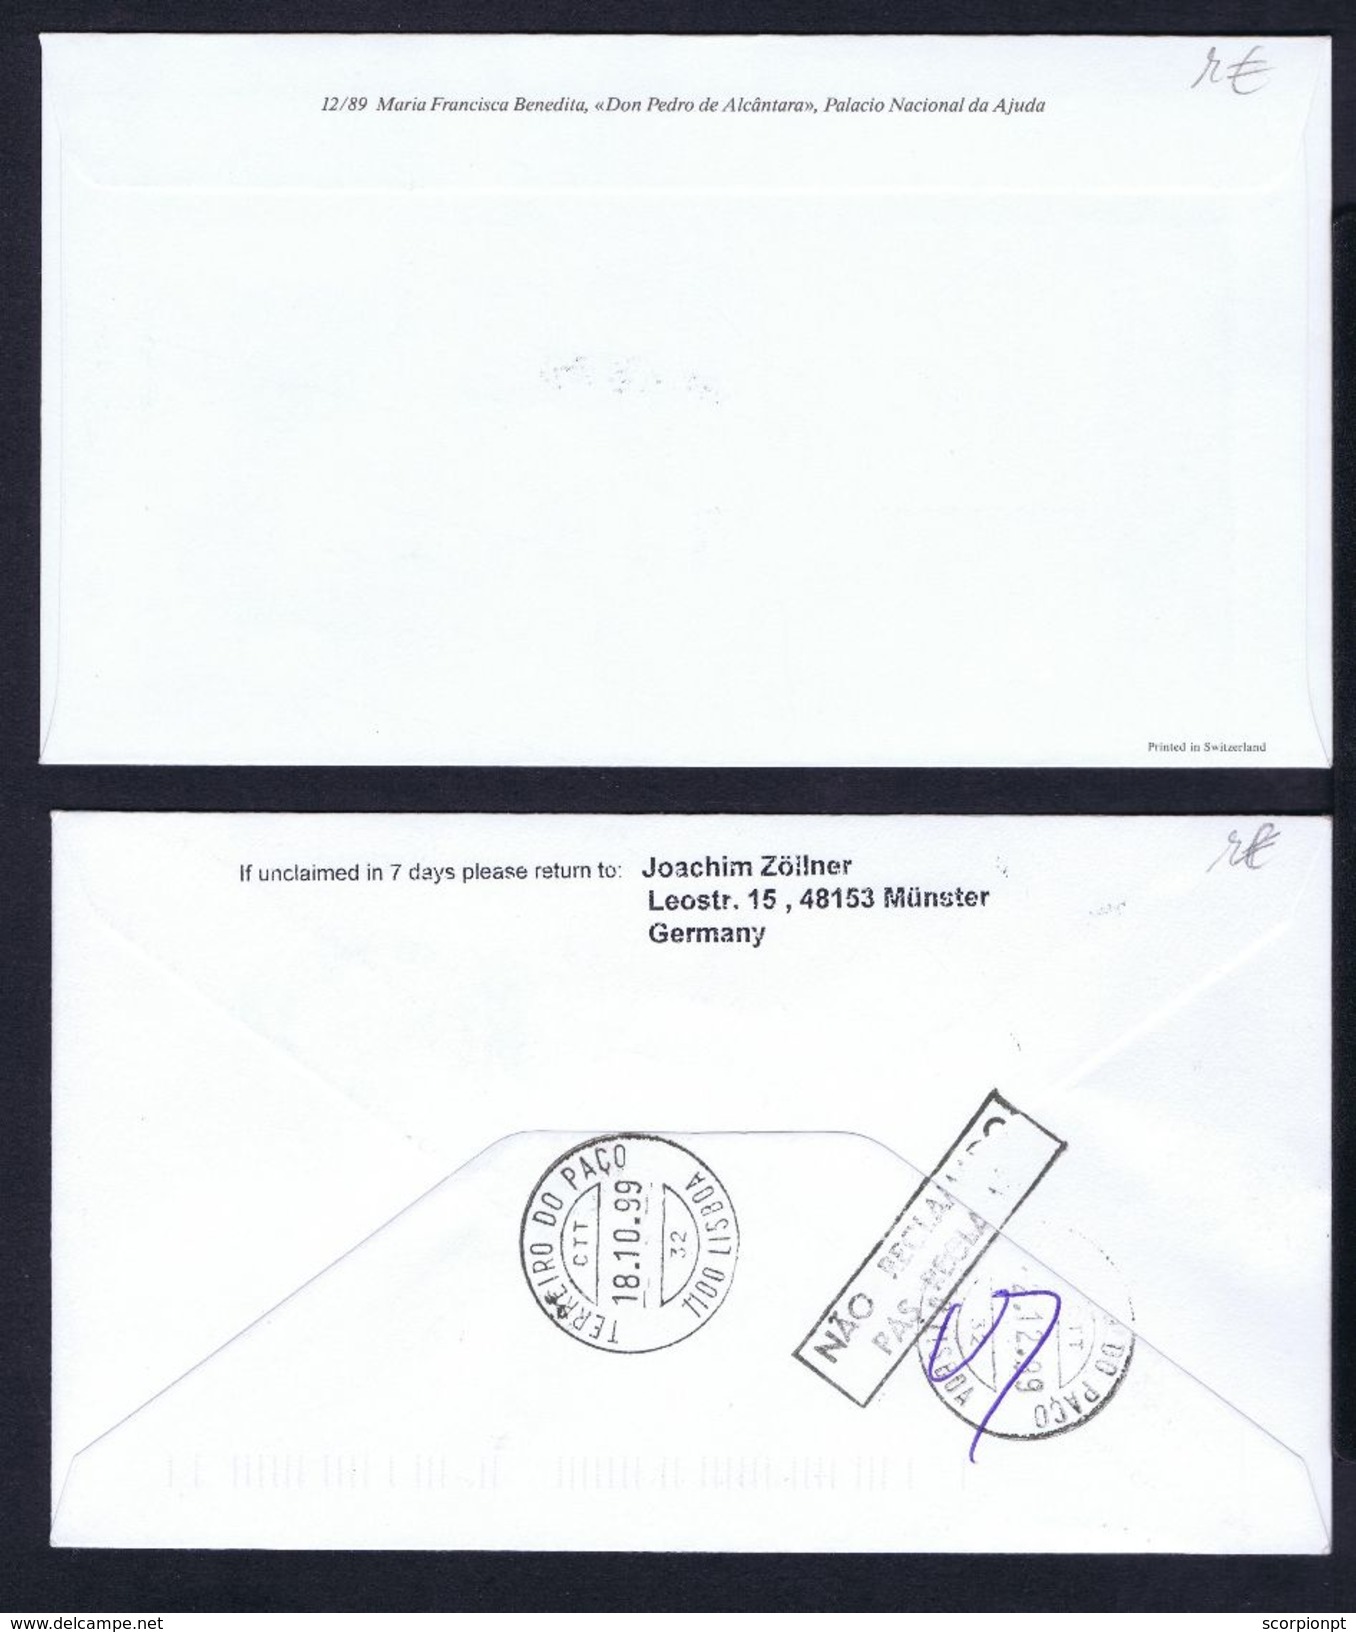 Sp4966 NATIONS UNIS UNICEF Architecture Arts Flags Fdc UNITED NATIONS NY Drapeaux 1989+1999 PORTUGAL (3 Itens) - Cartas & Documentos